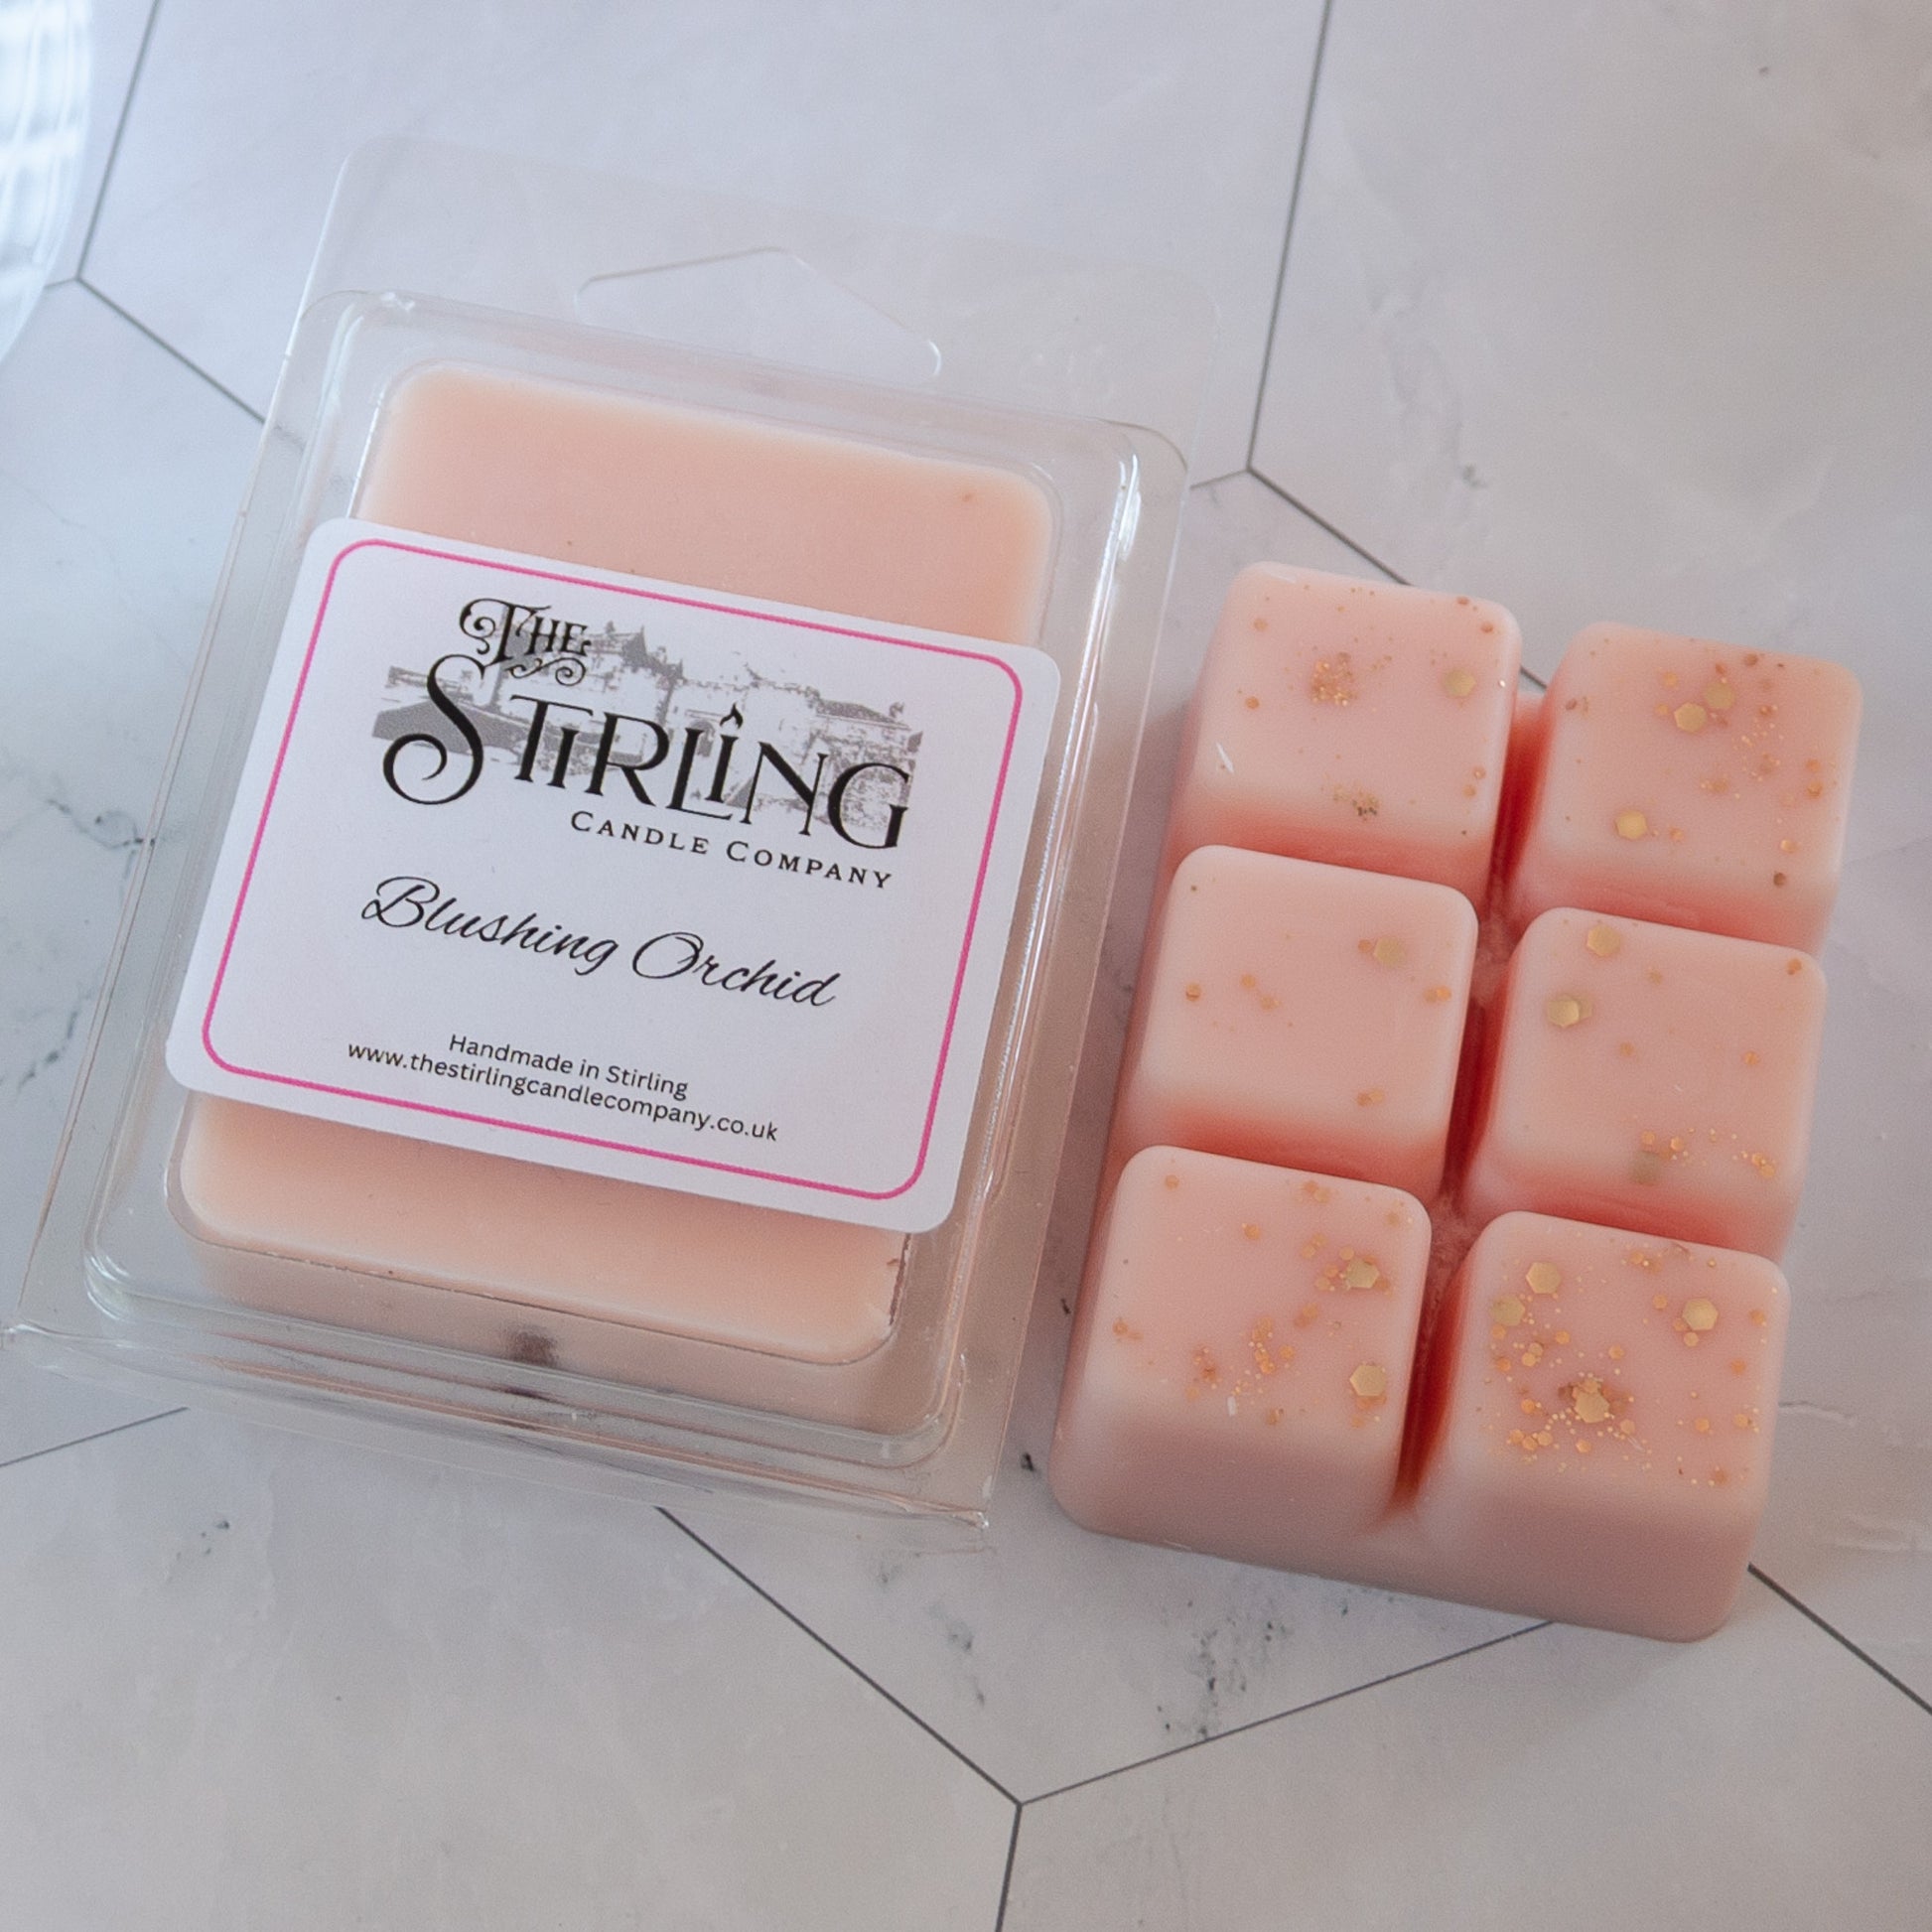 Clamshell - Blushing Orchid - The Stirling Candle Company